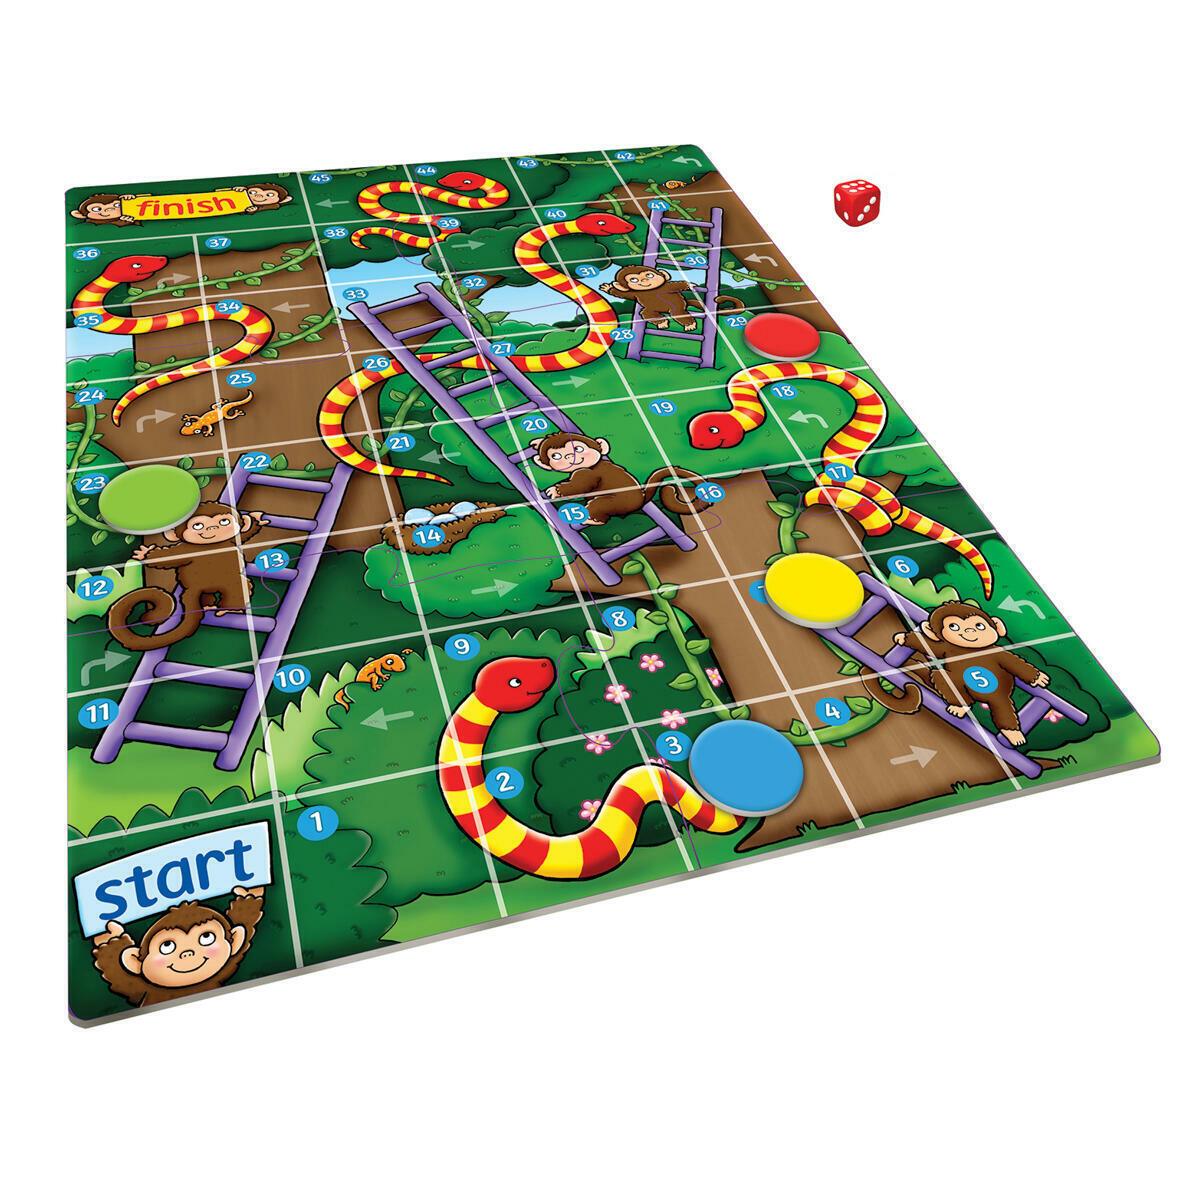 Jungle Snakes & Ladders Mini Game Kids Fun Board Games Activity - Home Inspired Gifts